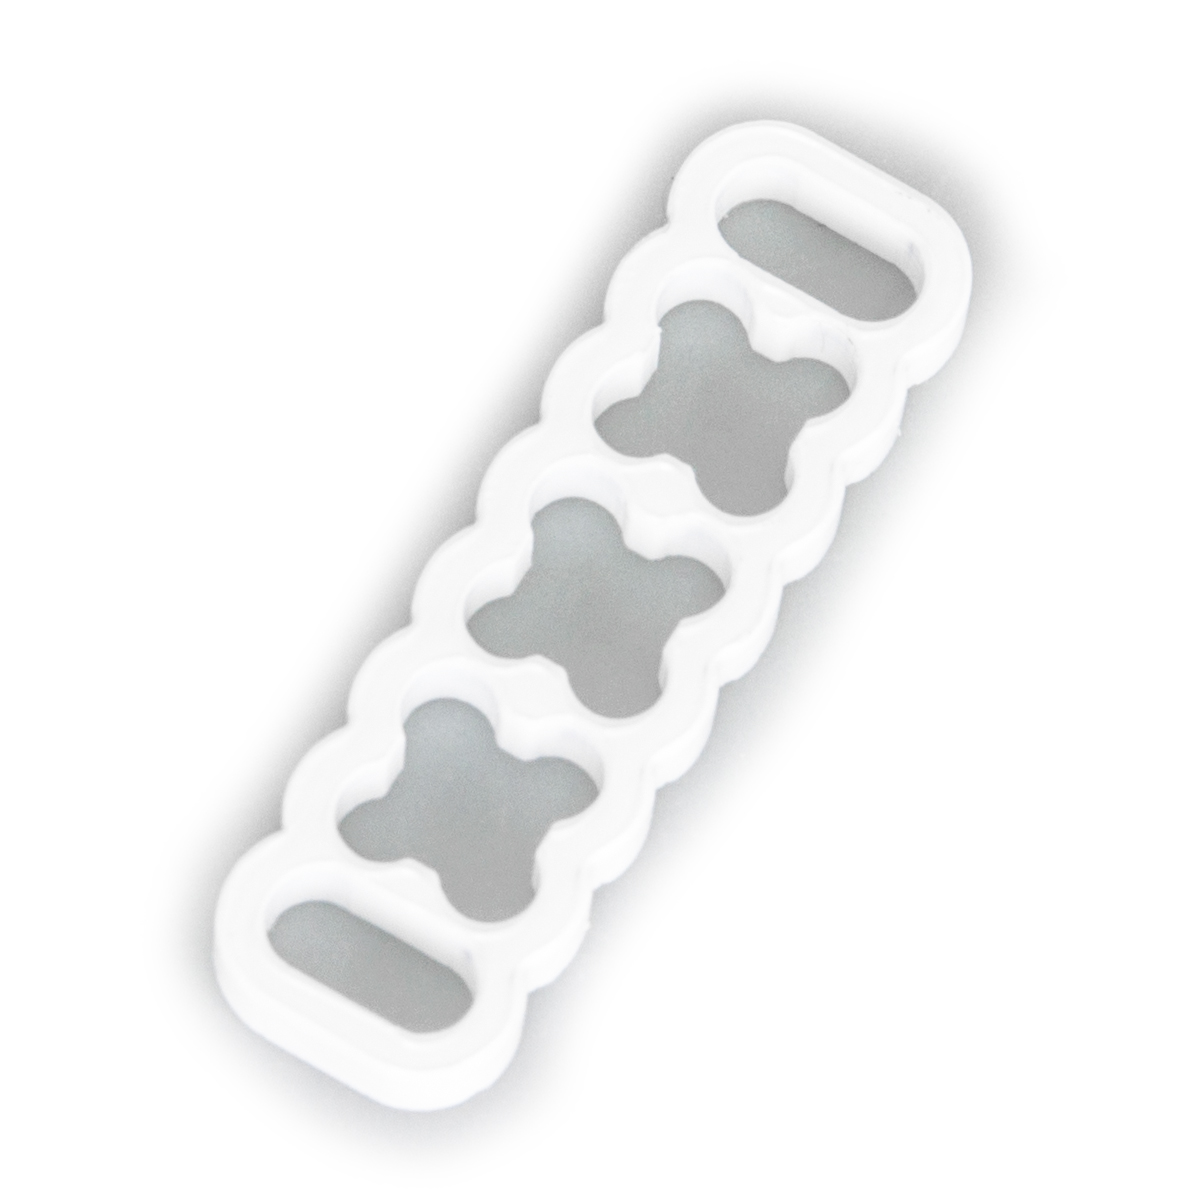 TechForge 16 Slot Stealth Cable Comb V2 - White